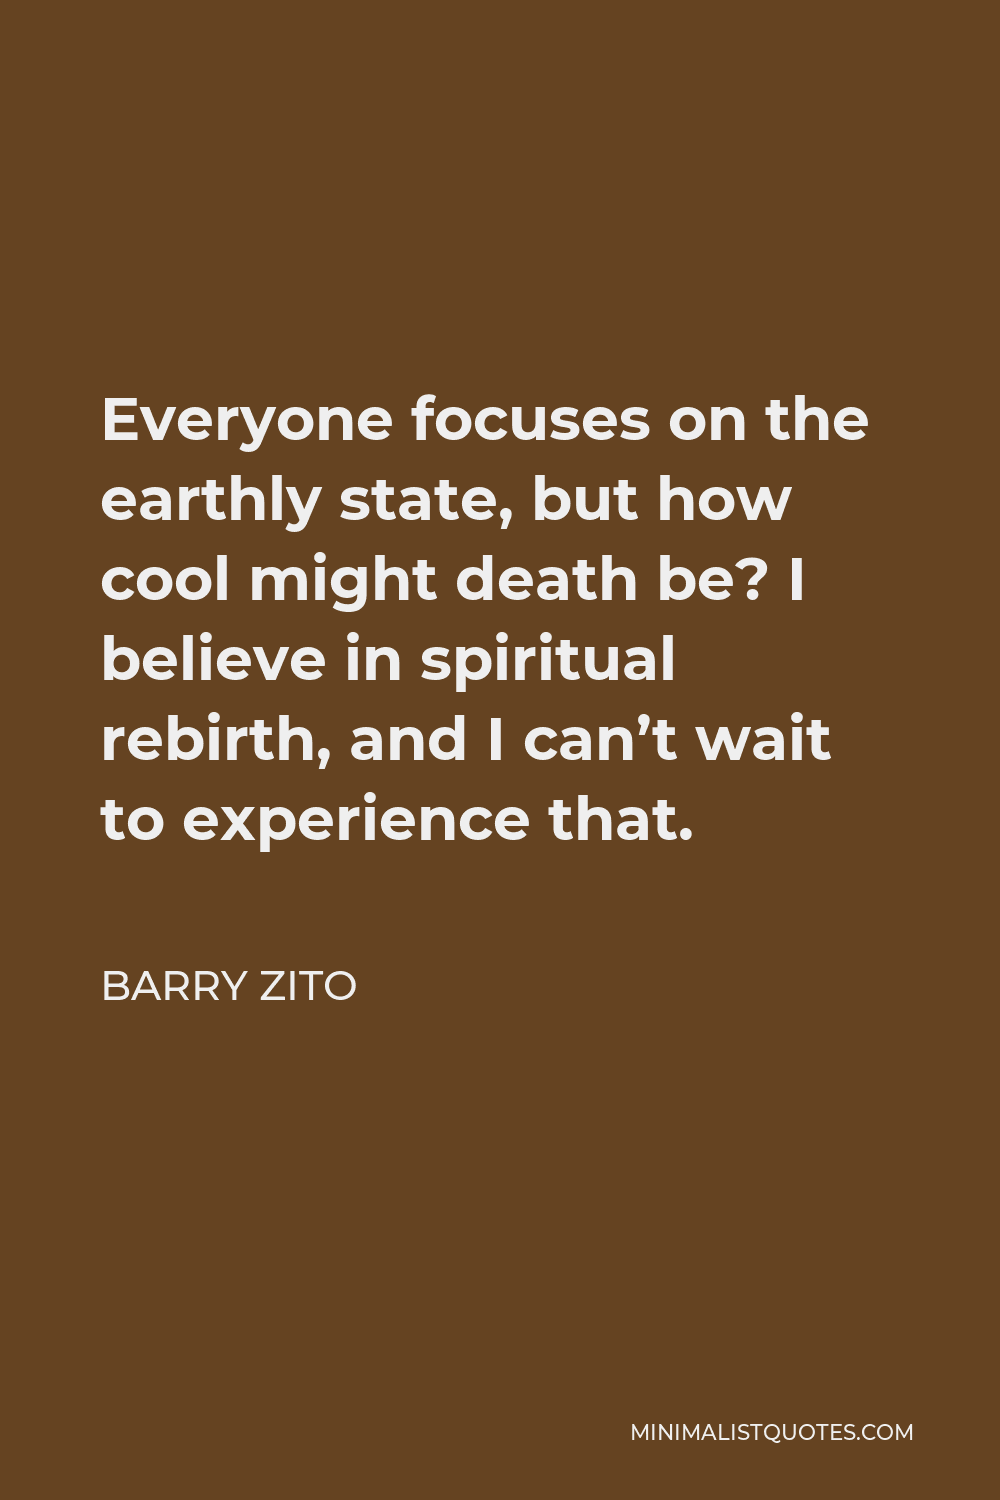 Barry Zito Quote - Everyone focuses on the earthly state, but how cool might death be? I believe in spiritual rebirth, and I can’t wait to experience that.